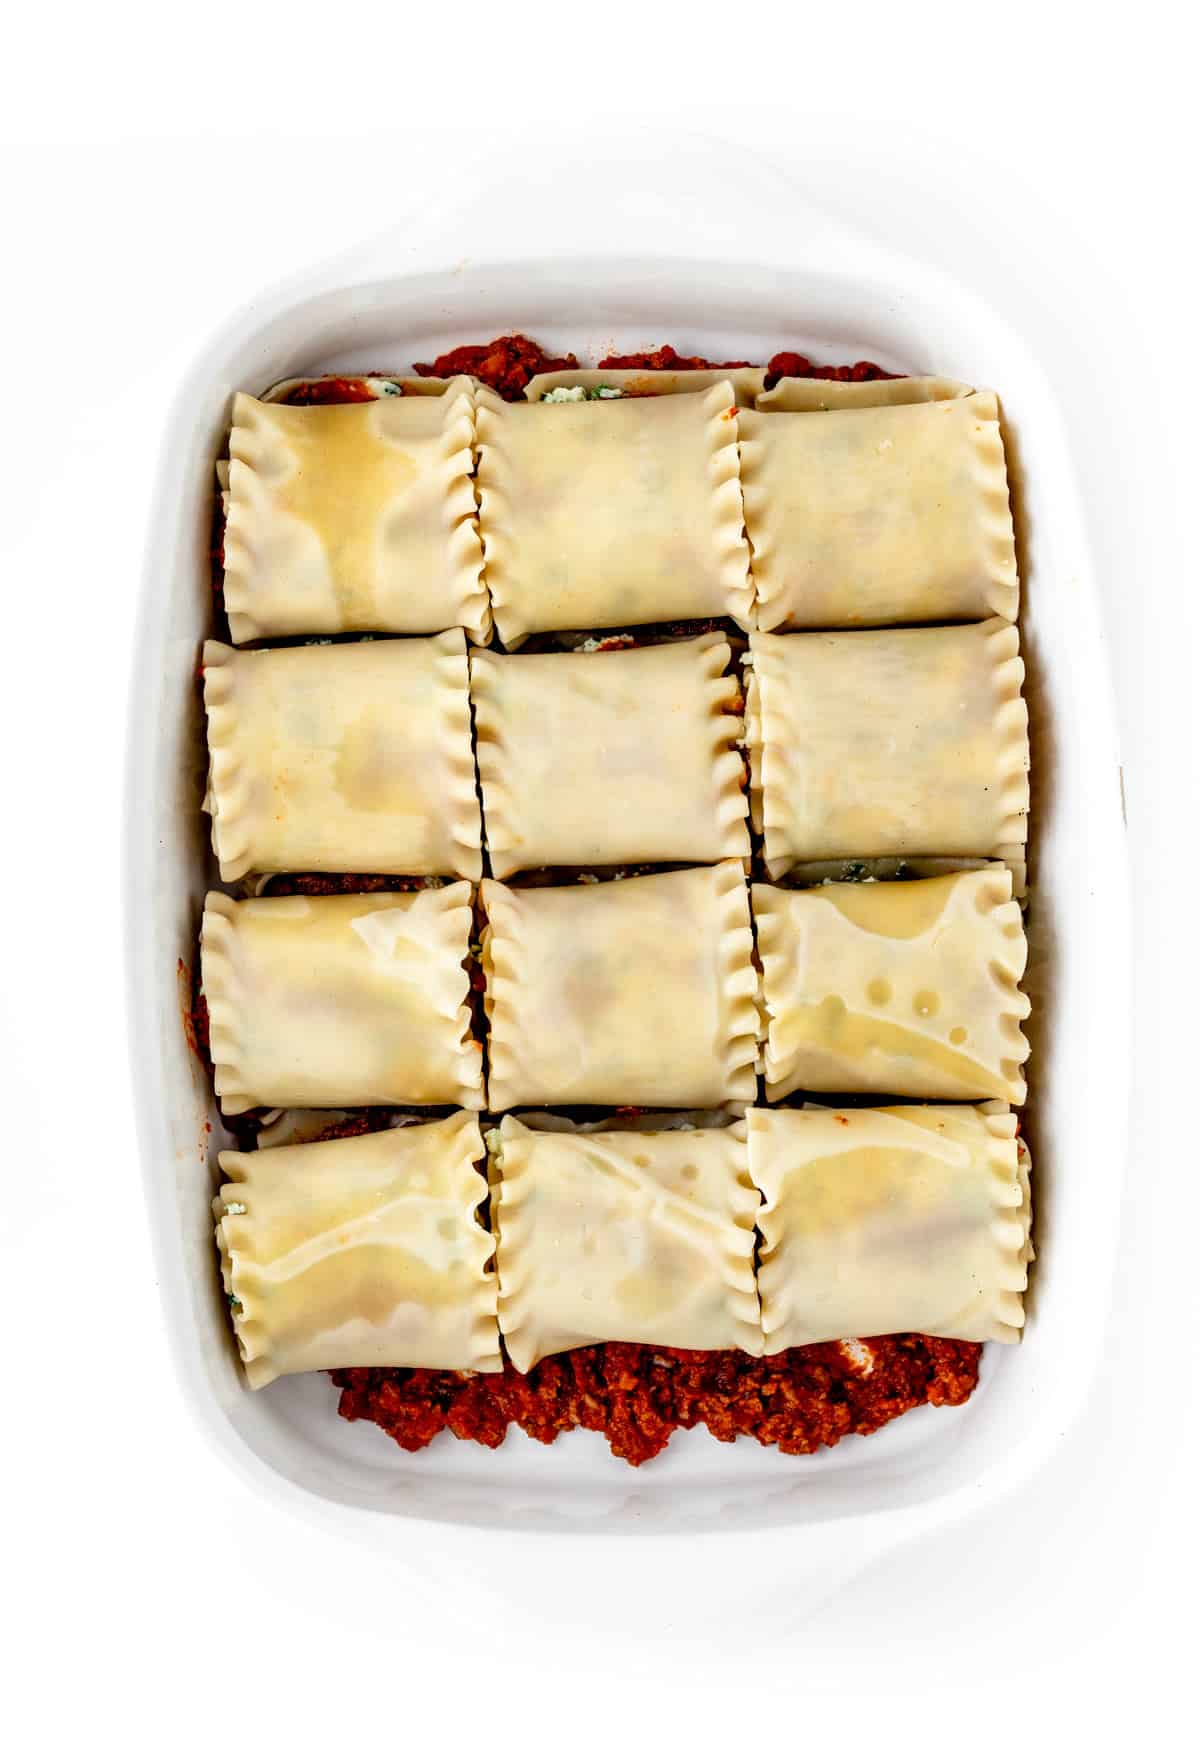 The lasagna noodles formed into roll ups in a baking dish, prior to cooking.